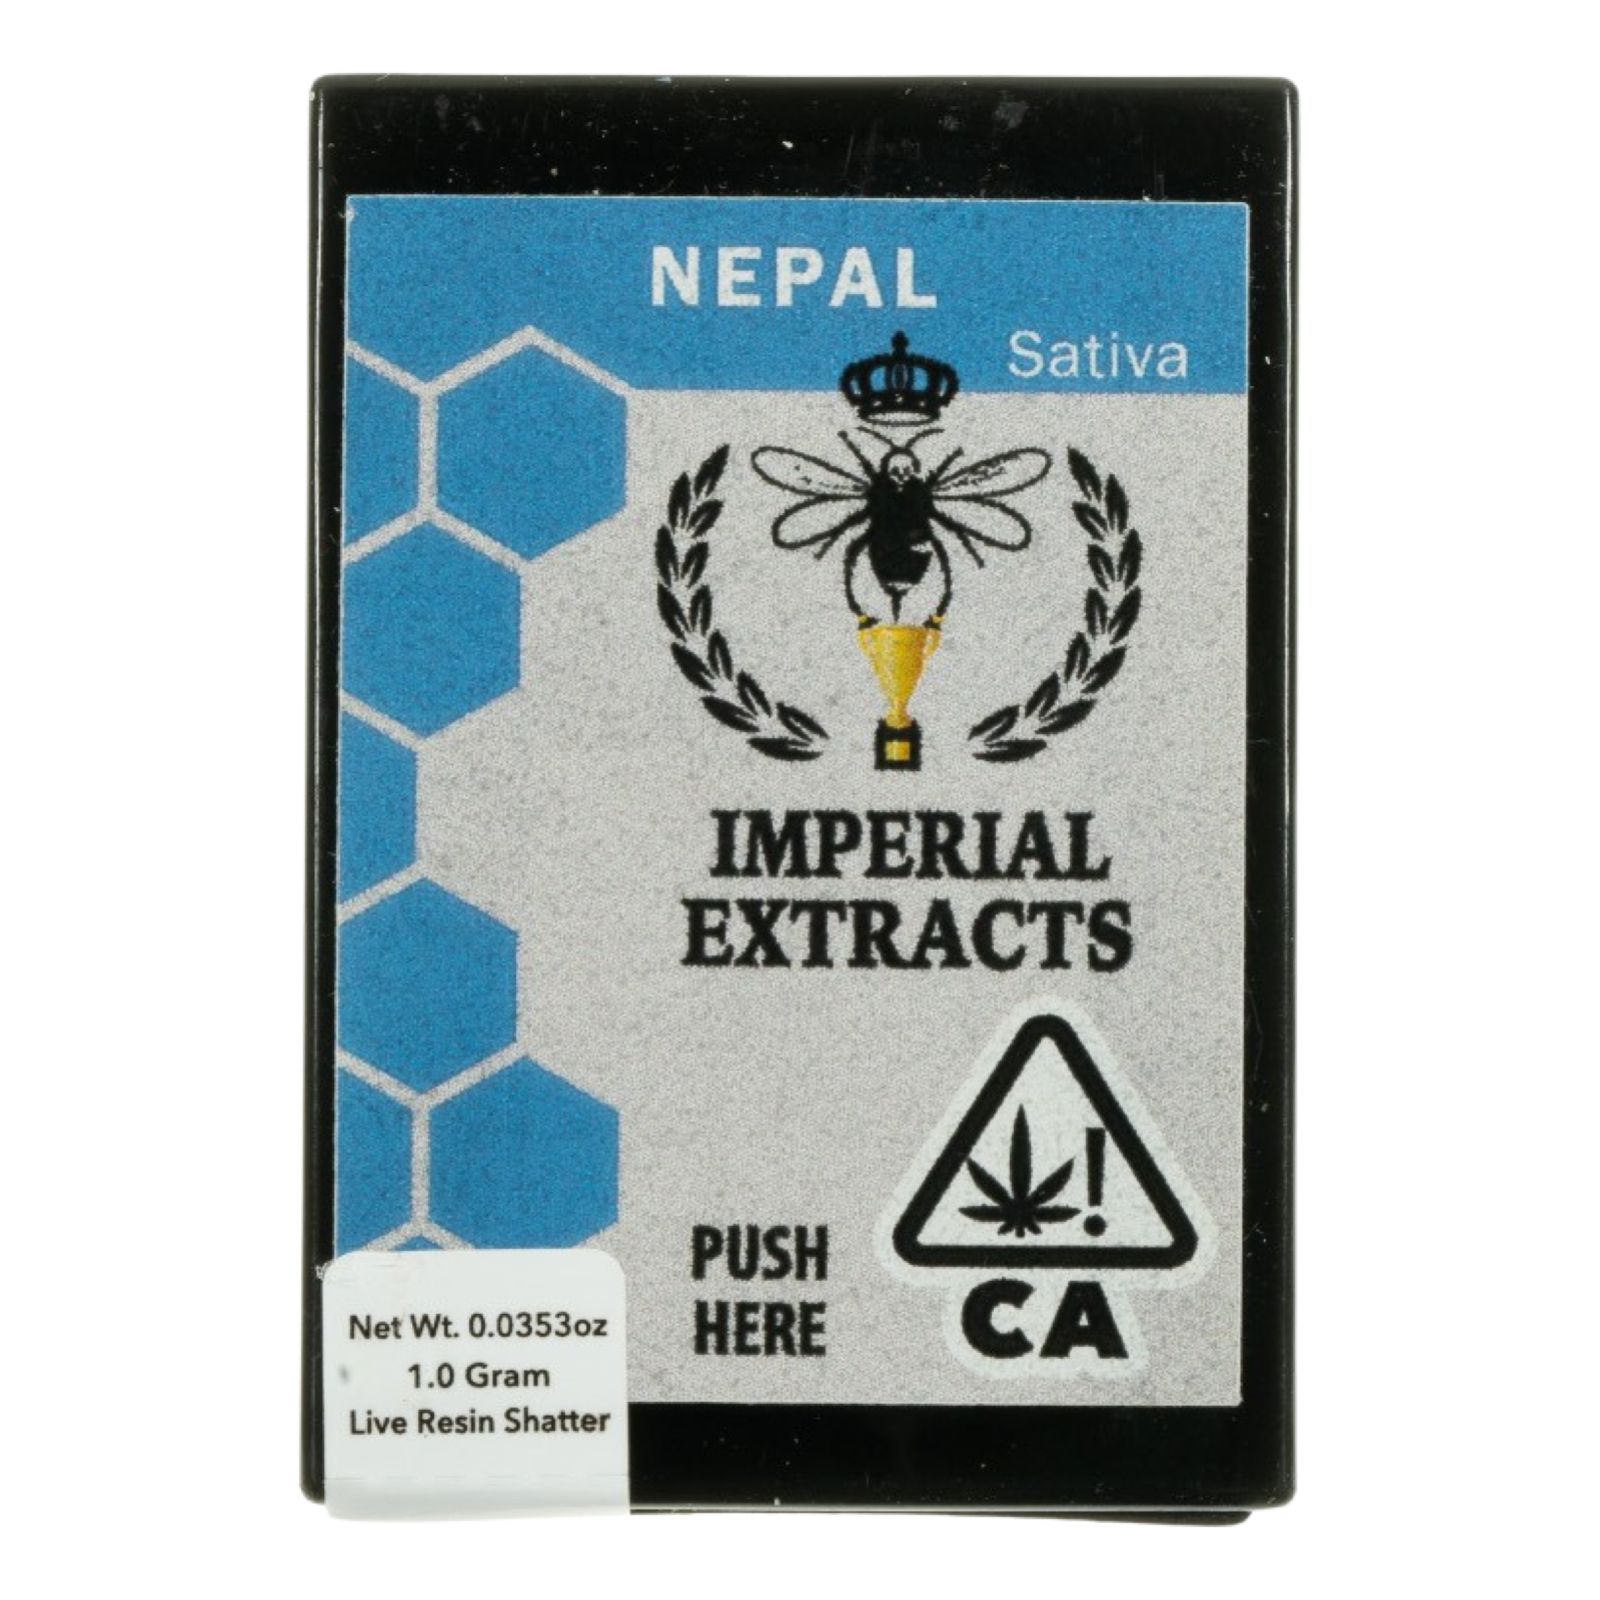 1 Gram Live Resin Shatter by Imperial Extracts | Nepal | Sativa